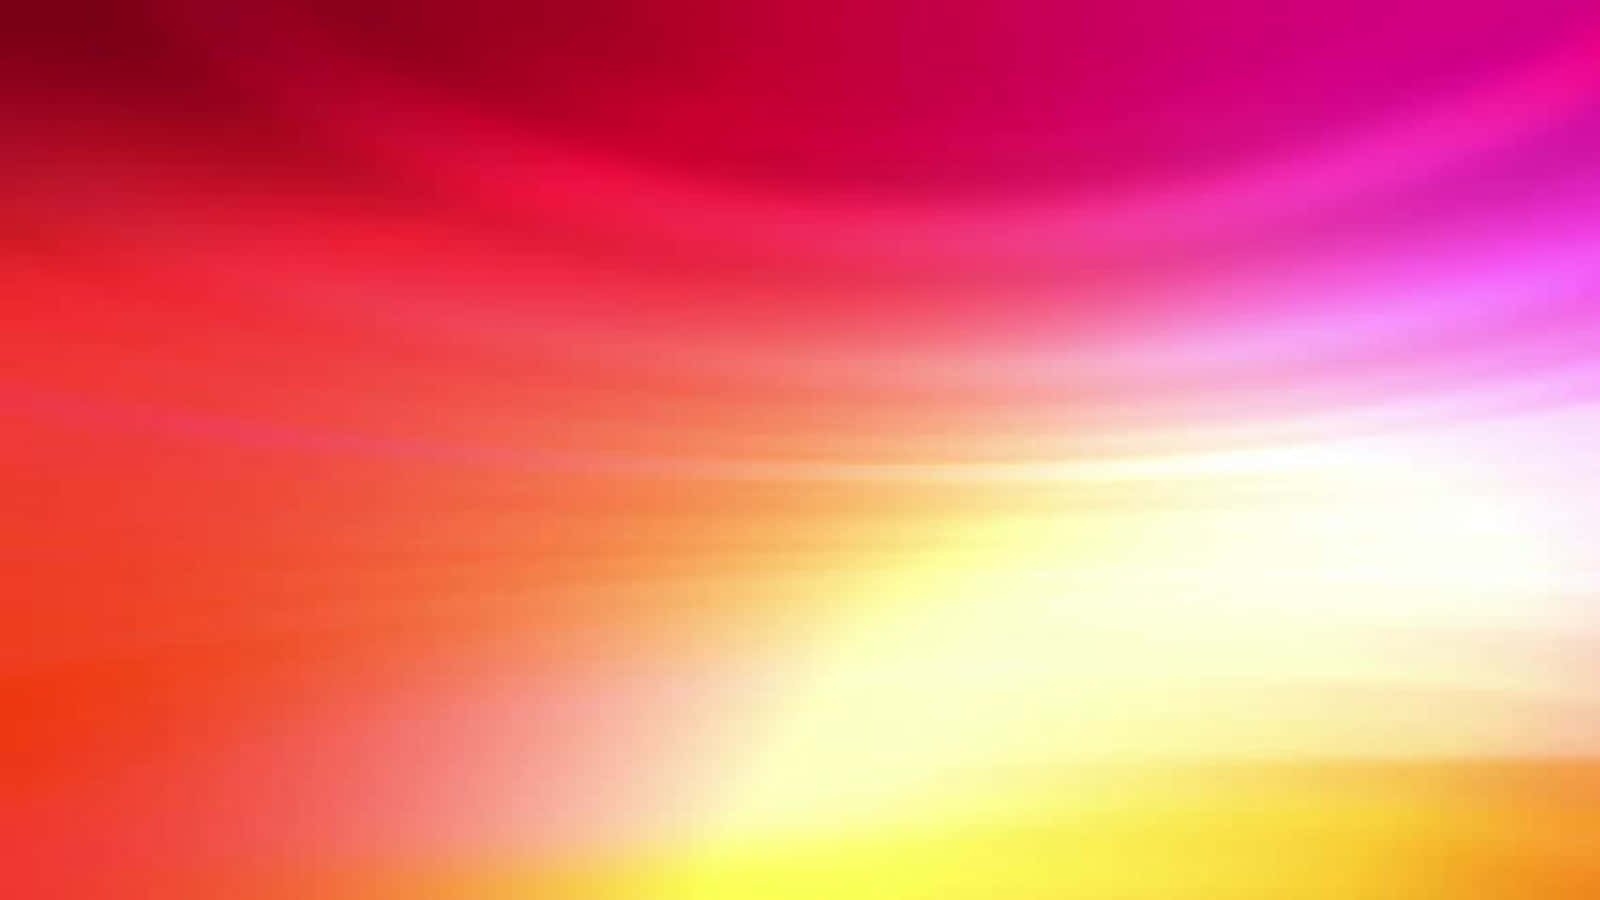 a colorful abstract background with a yellow and red color